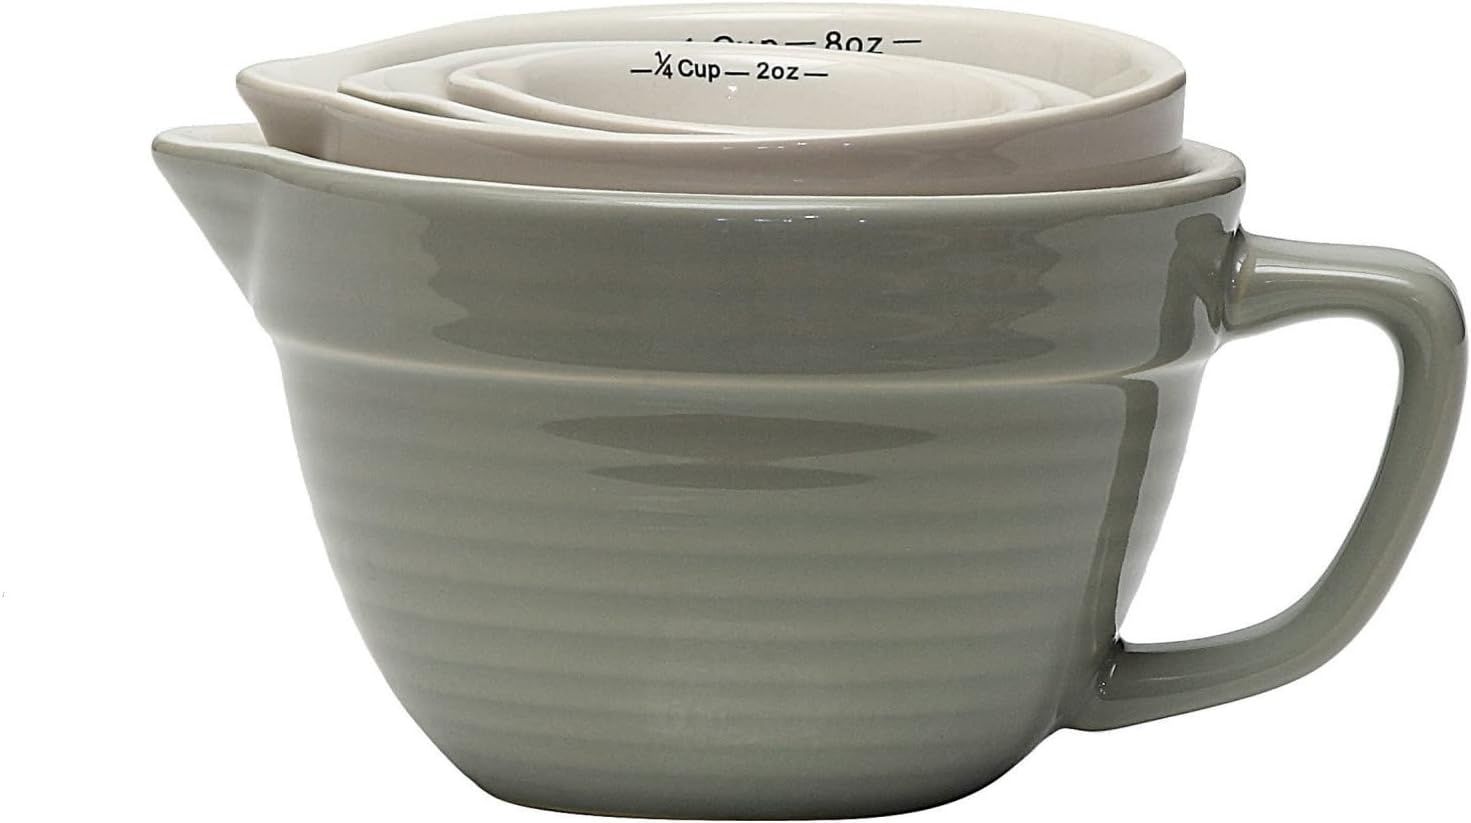 Creative Co-Op Set of 4 Batter Bowl Shaped Measuring Cups in Greys | Amazon (US)